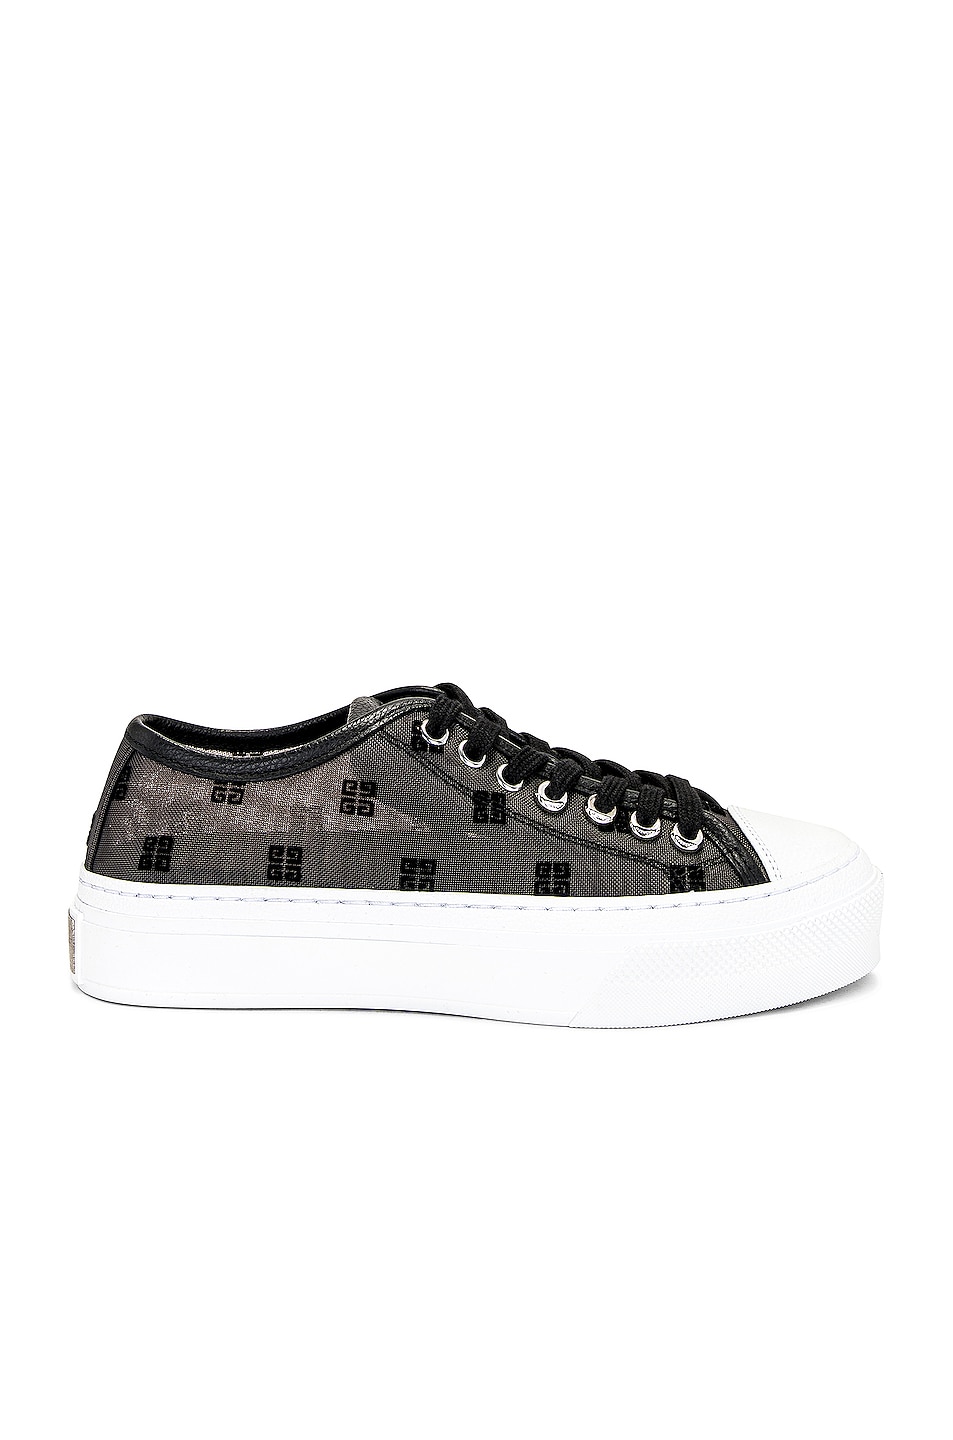 Image 1 of Givenchy City Low Sneaker in Black & White